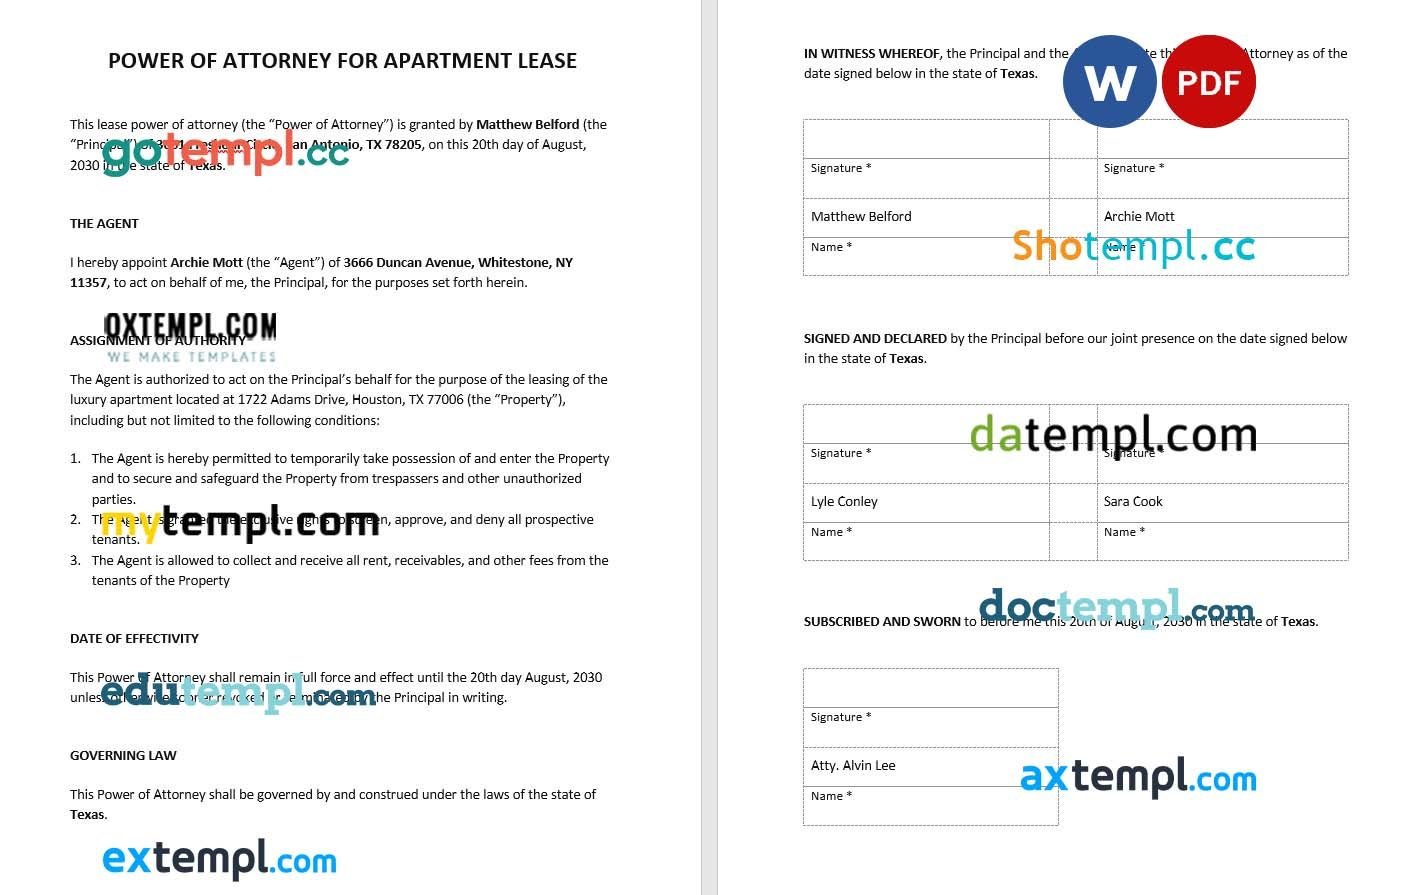 Power of Attorney for Apartment Lease example, fully editable